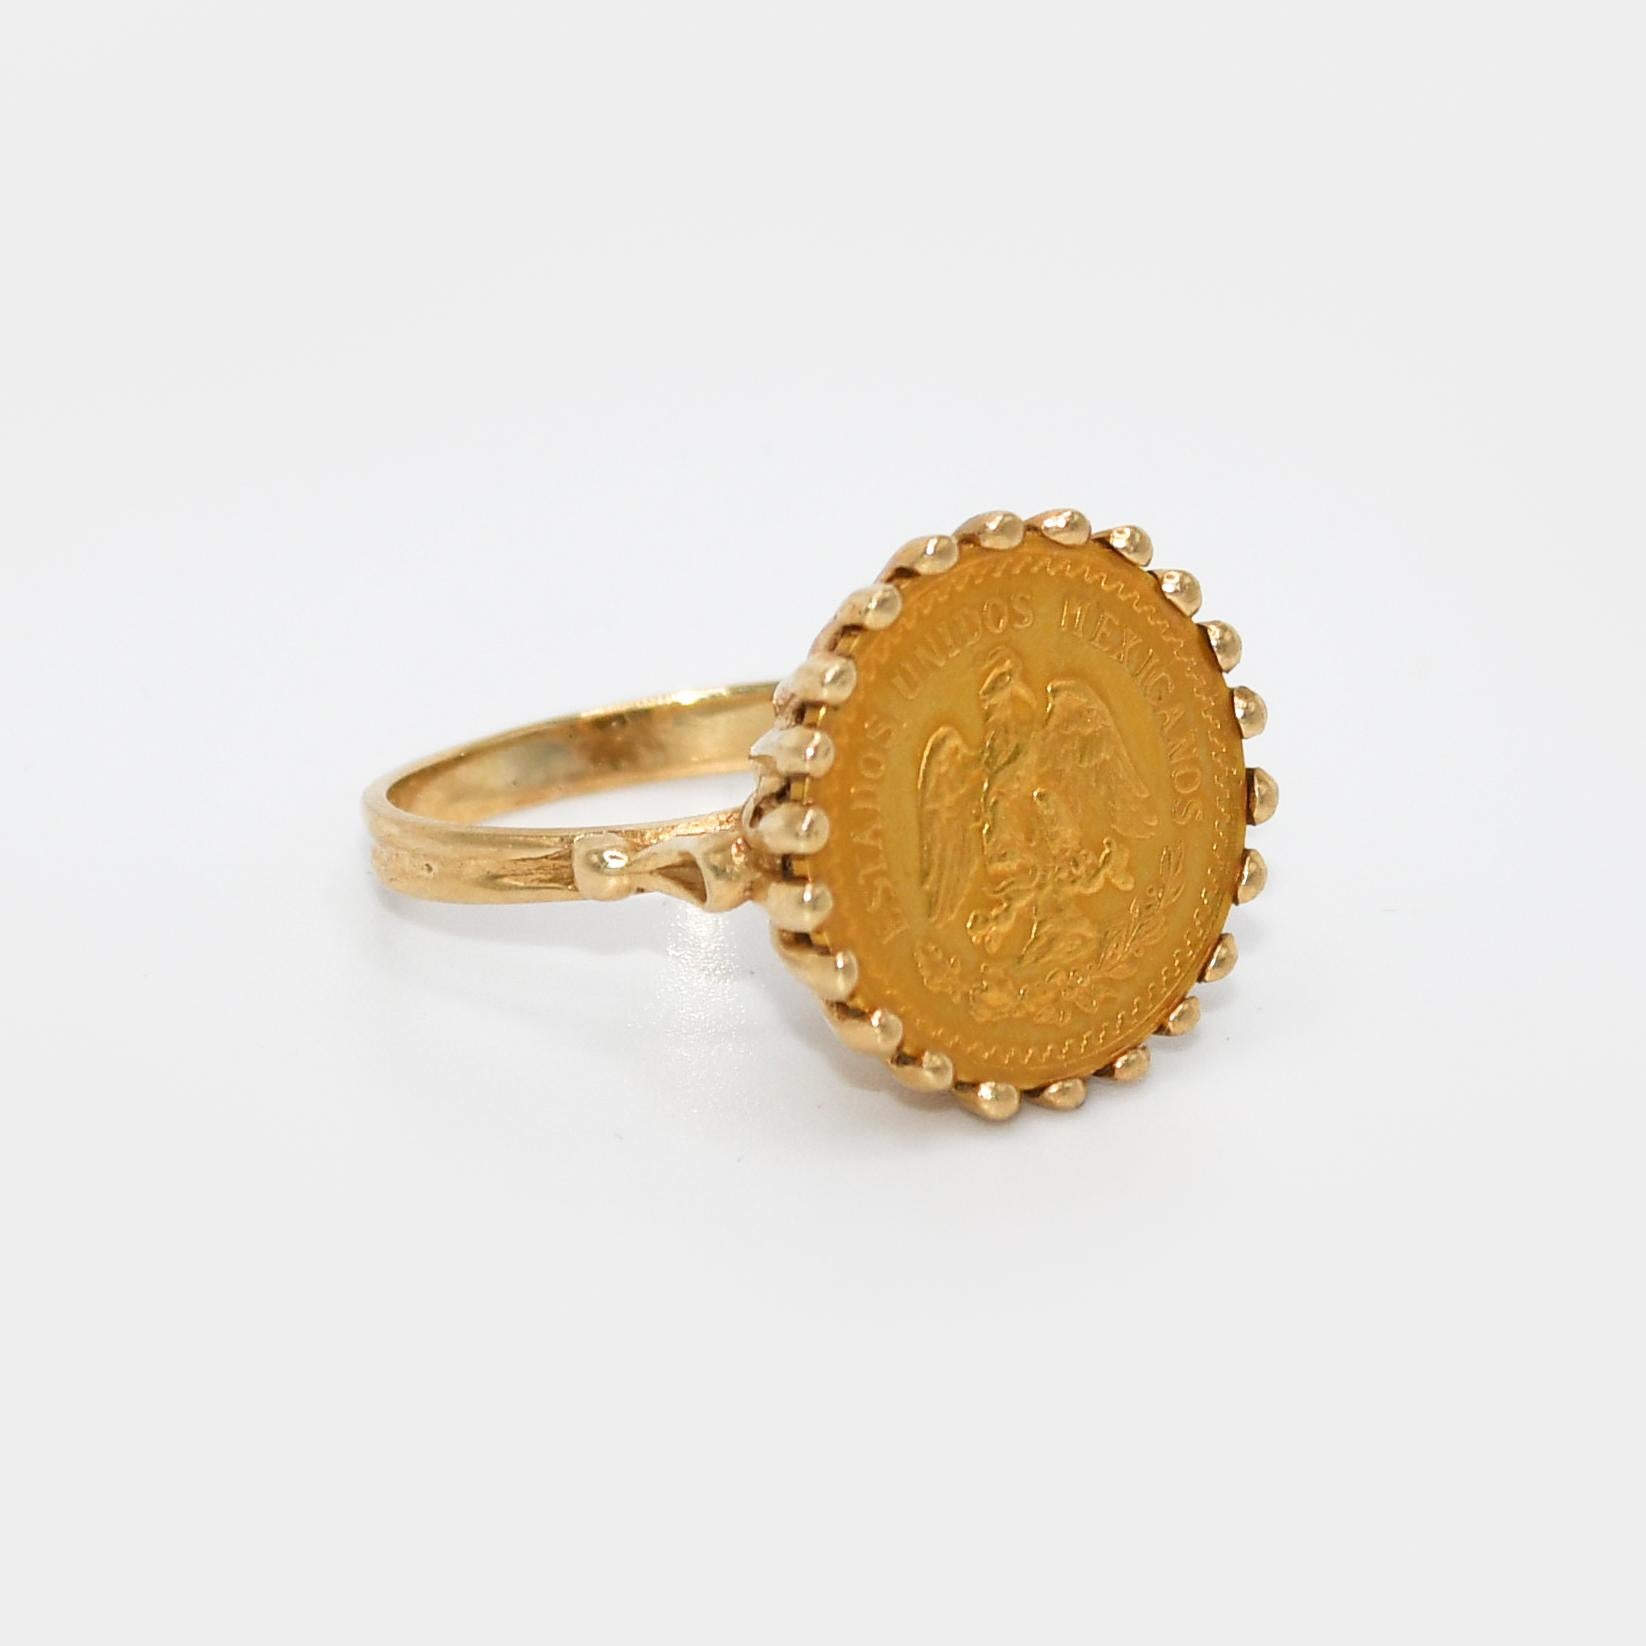 14k Yellow Gold 2.50 Mexican Peso Ring.
The pesos agw is .0603ozt.
The ring is 14k, total weight 5.9gr.
Size 6 1/4. Can be size up or down one size for additional fee